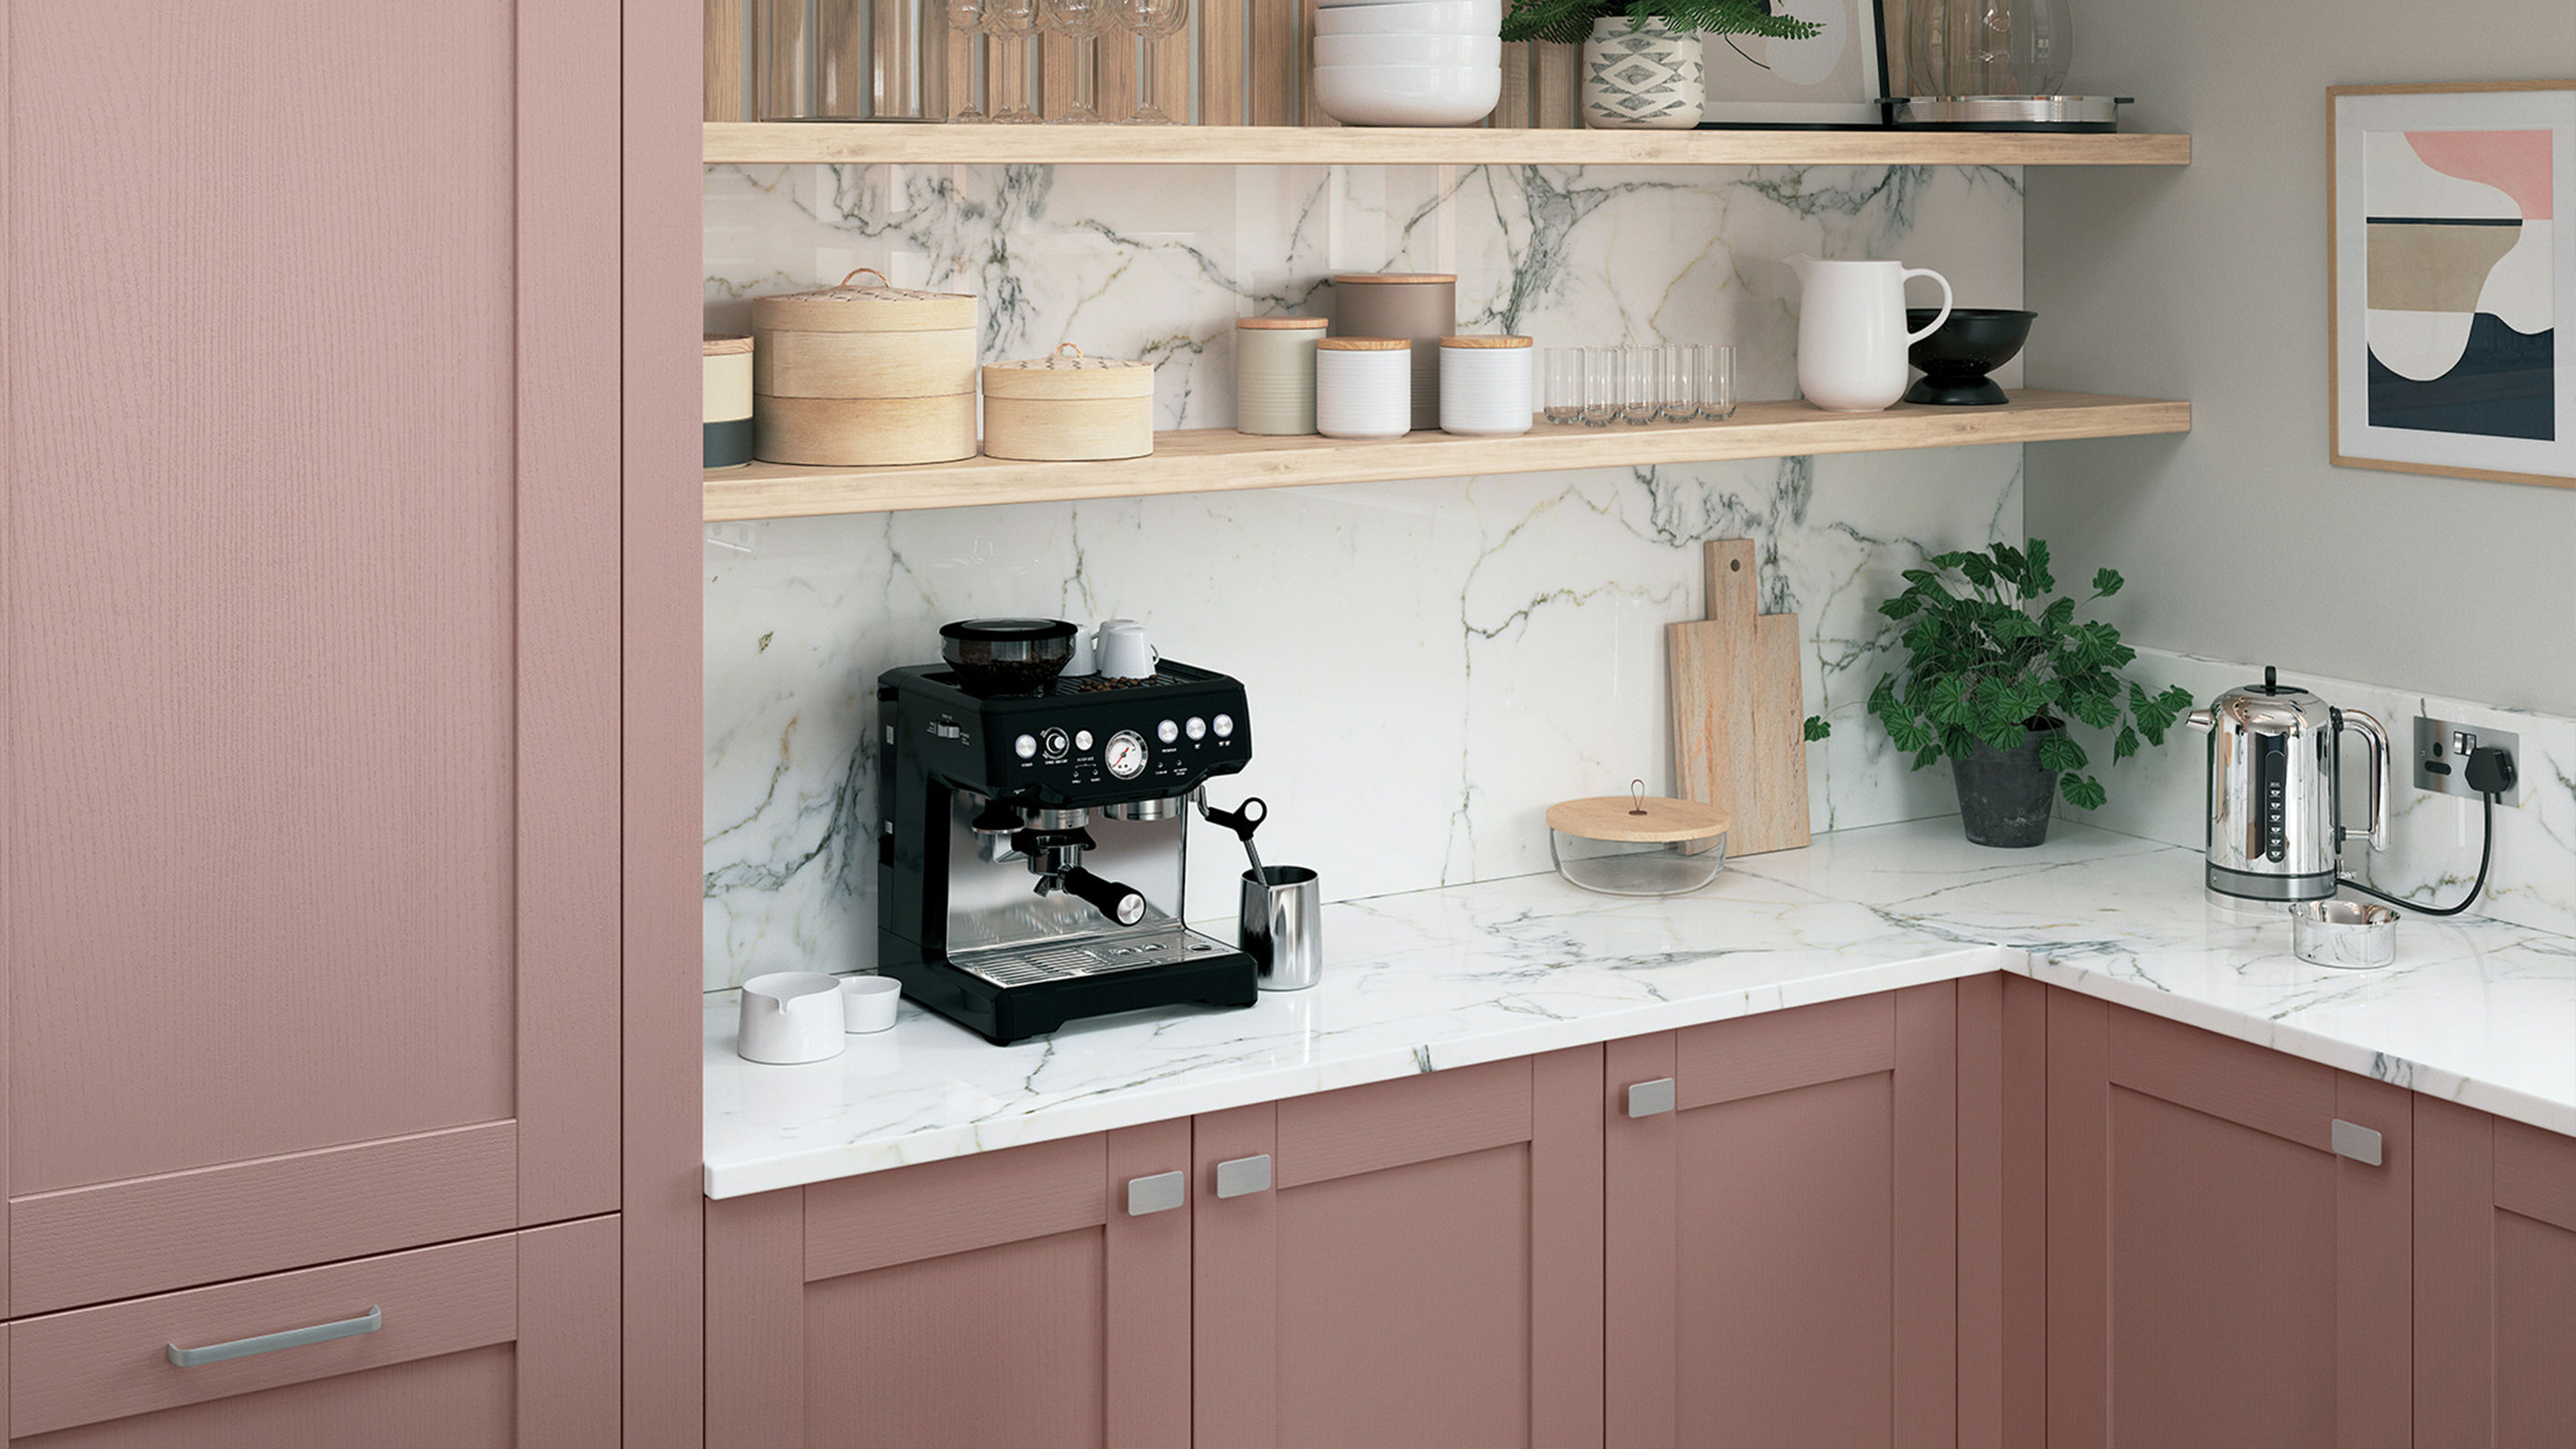 Madison Solid Wood Vintage Pink kitchen showcasing a charming blend of classic craftsmanship and retro pink hues